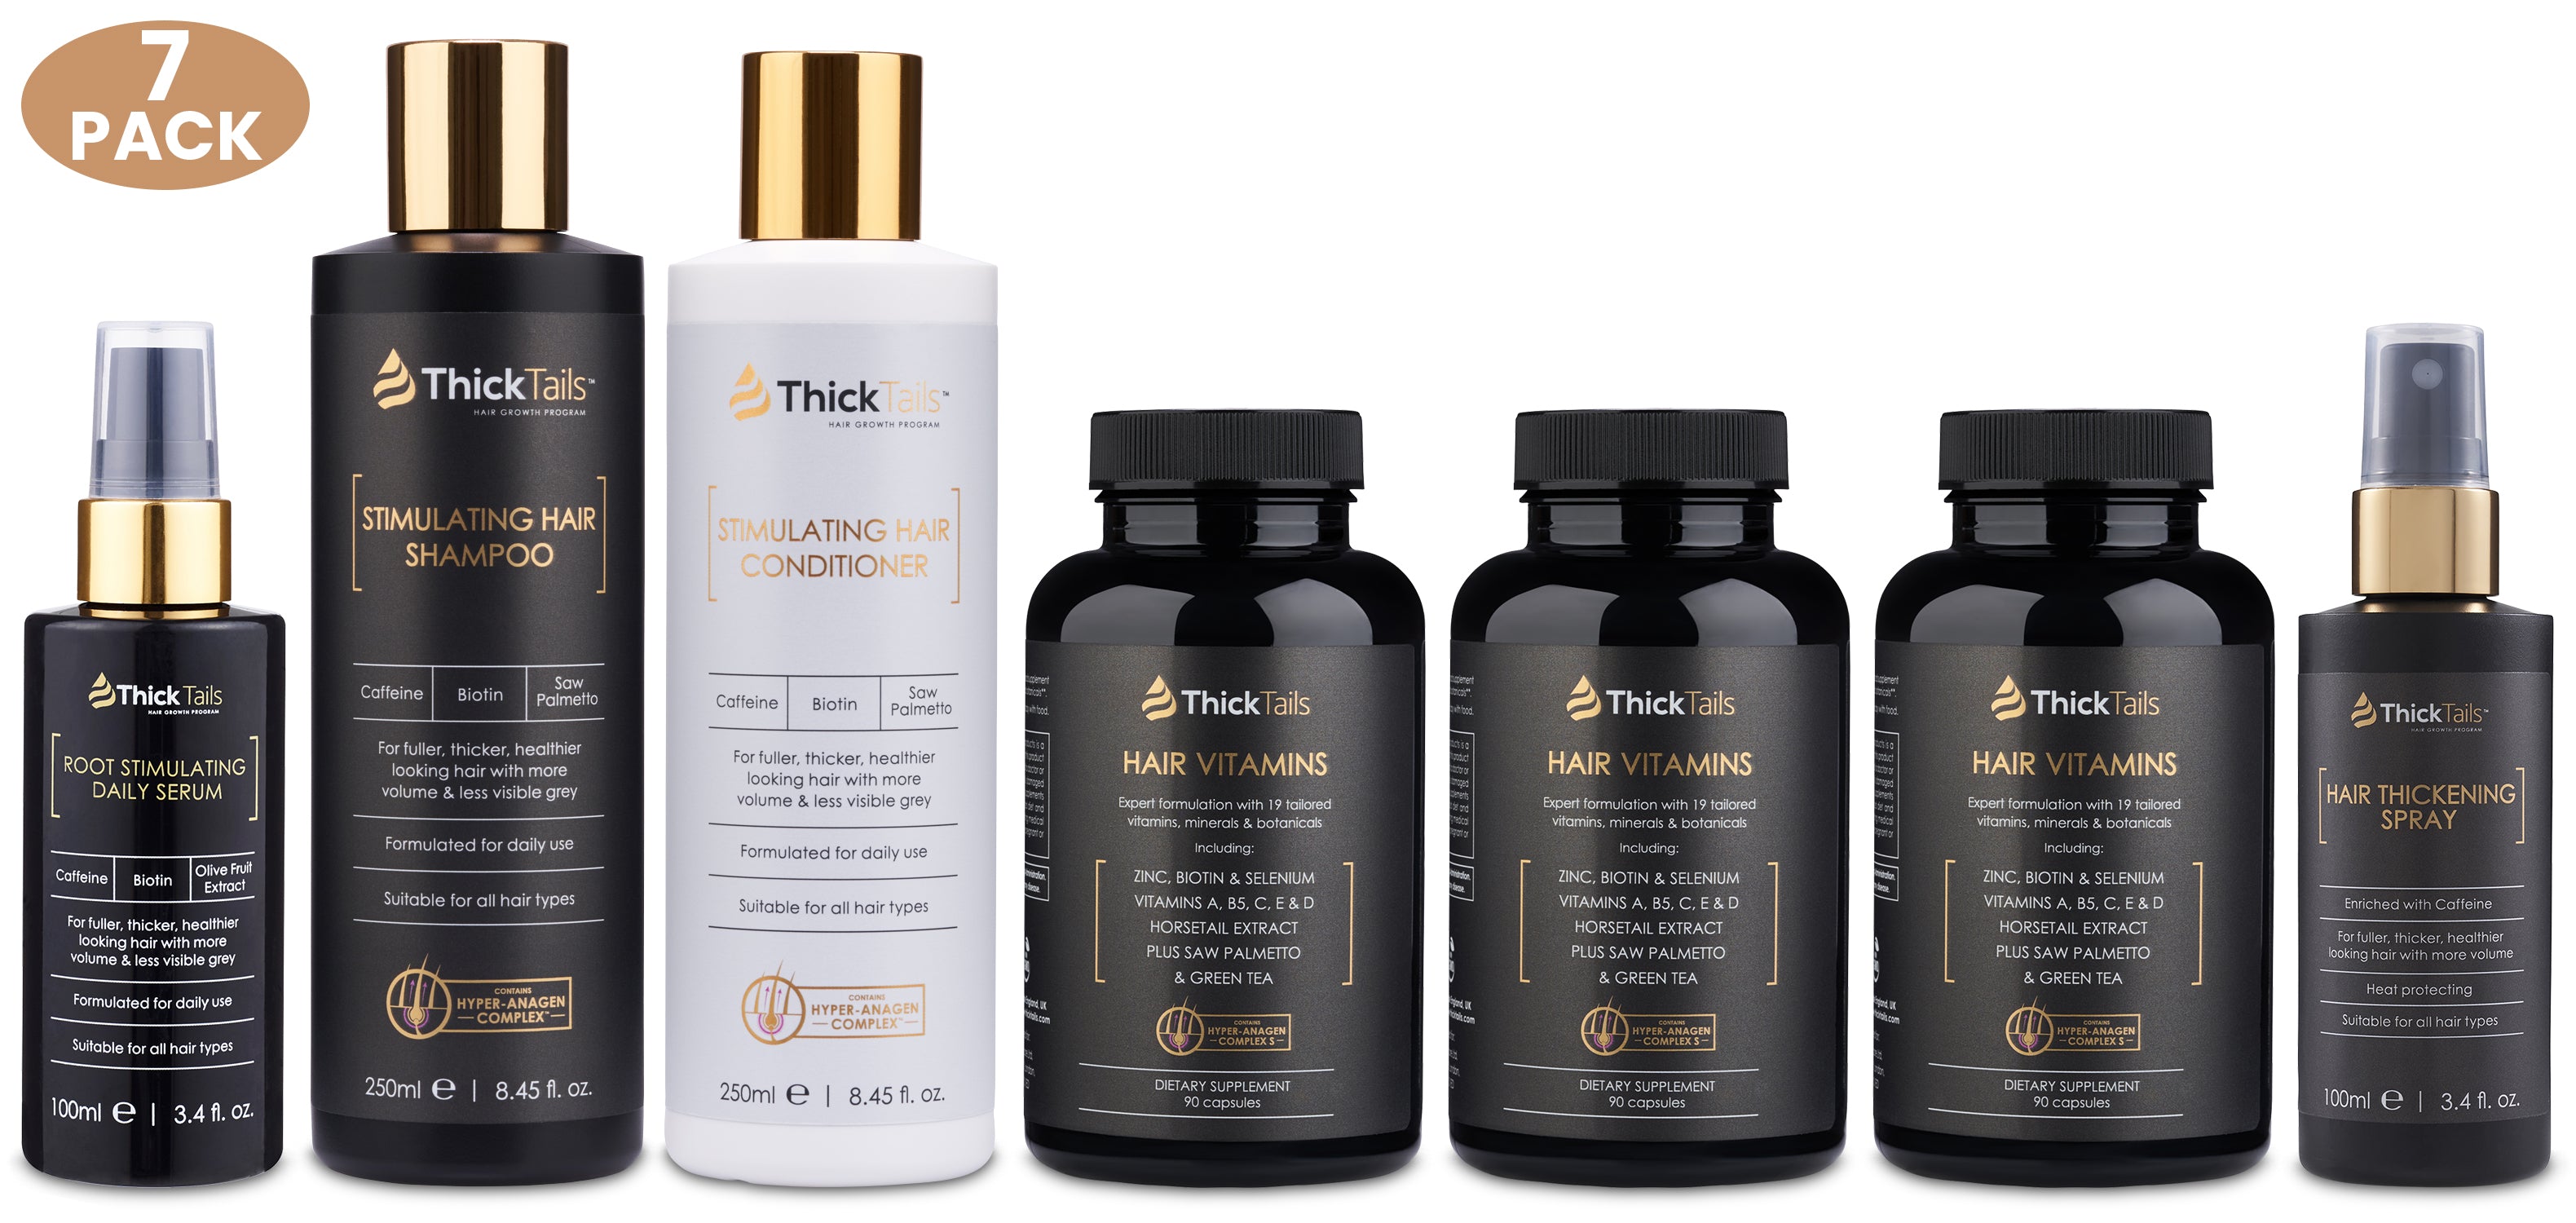 ThickTails Total 90-Day Hair Thickening System | 7-Pack | Save £60